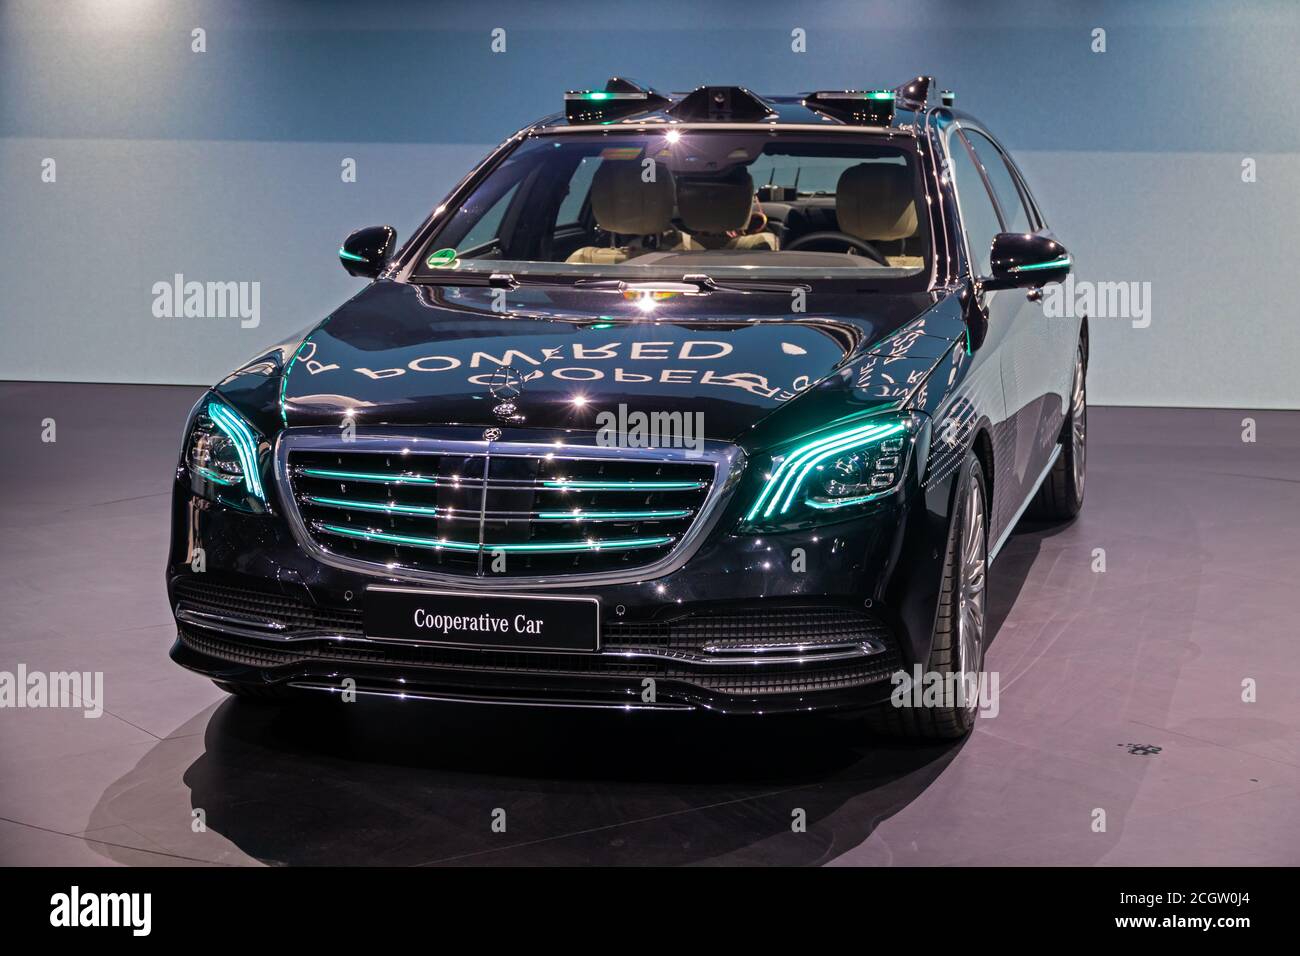 FRANKFURT, GERMANY - SEP 11, 2019: Mercedes Benz Cooperative Car, an autonomous vehicle that uses lights to let pedestrians know what it'ss about to d Stock Photo